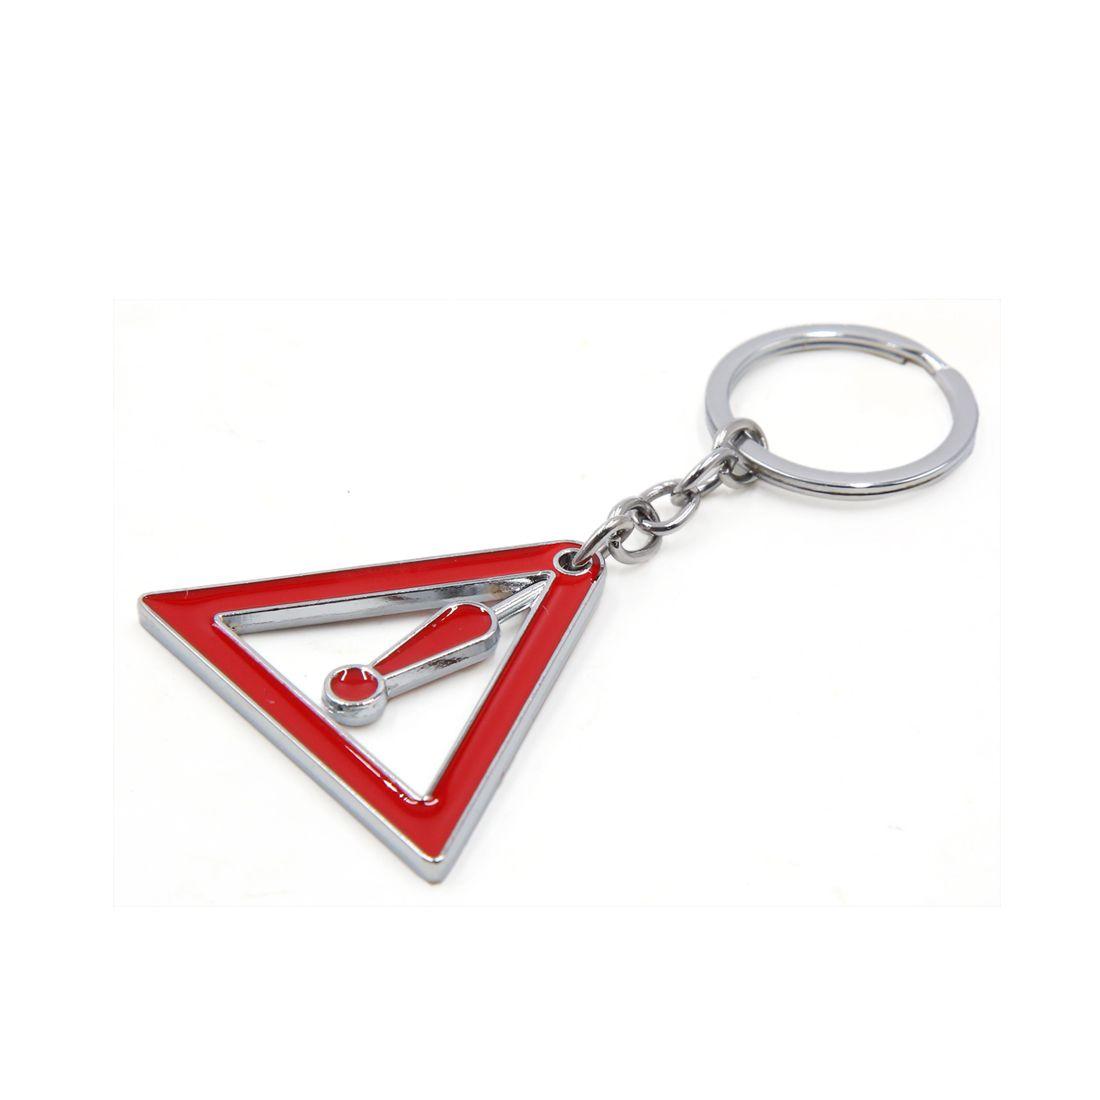 Silver Car with Red Triangle Logo - Portable Red Triangle Warning Sign Design Key Ring Keychain for Car ...